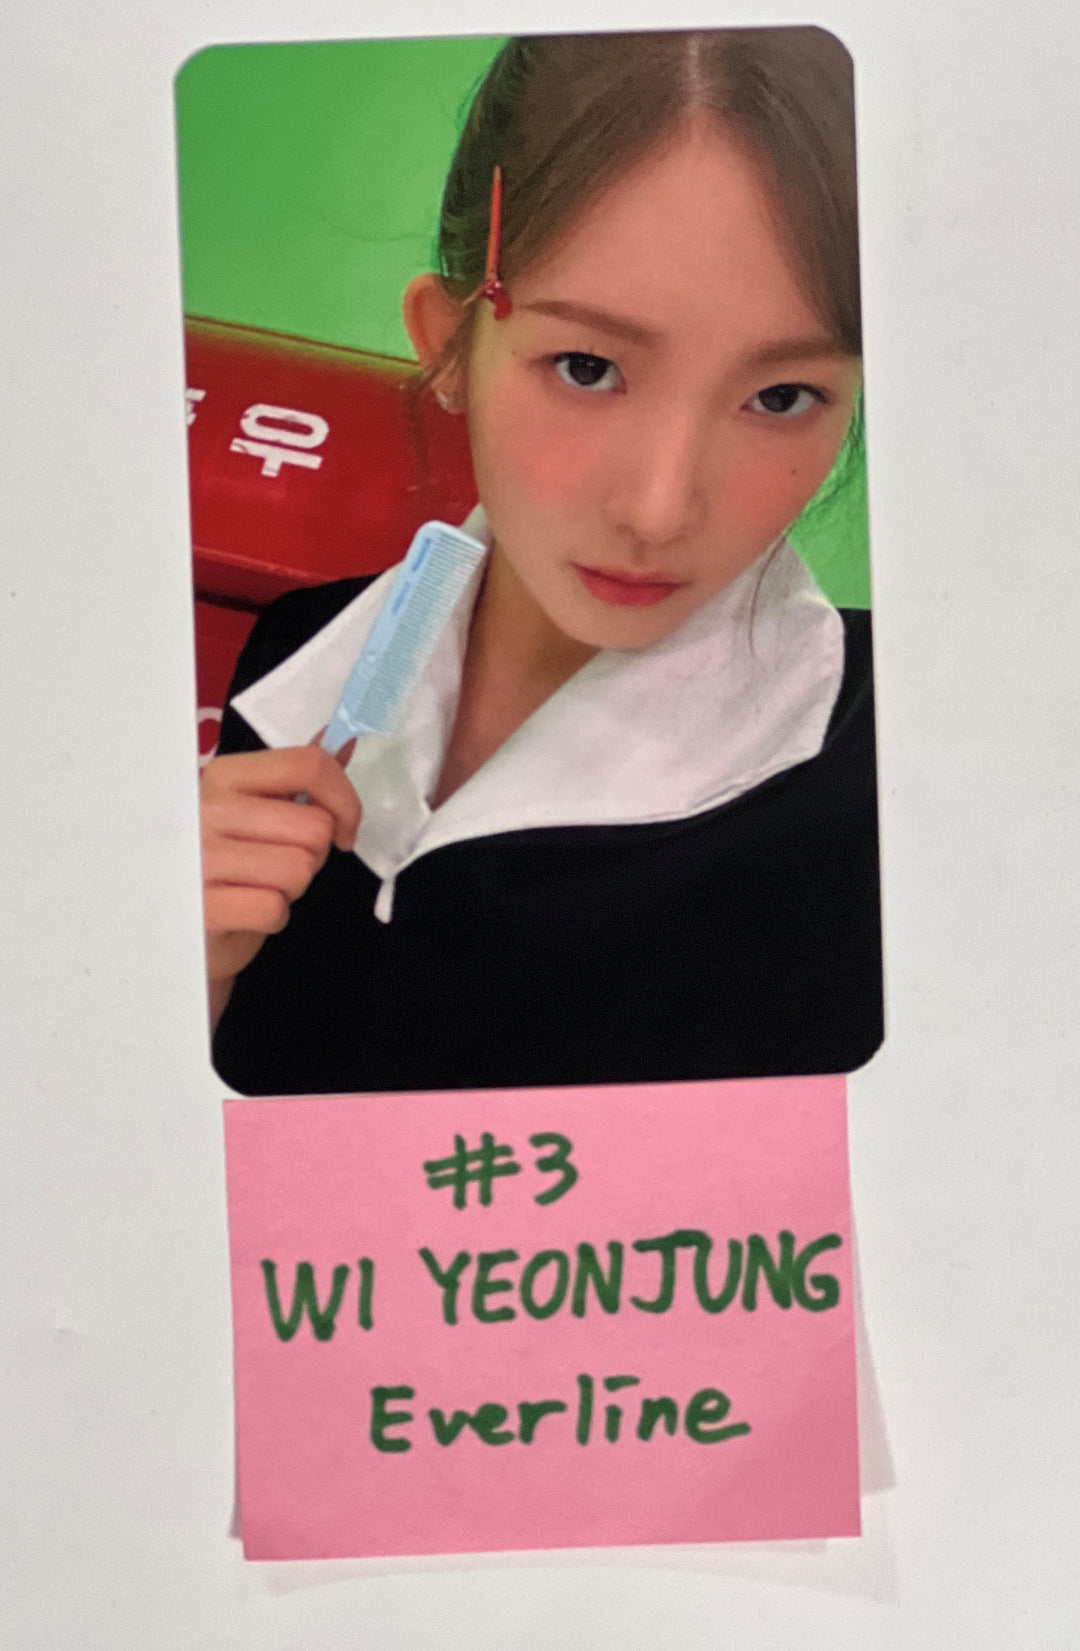 YOUNG POSSE "MACARONI CHEESE" - Everline Fansign Event Photocard [23.11.02]